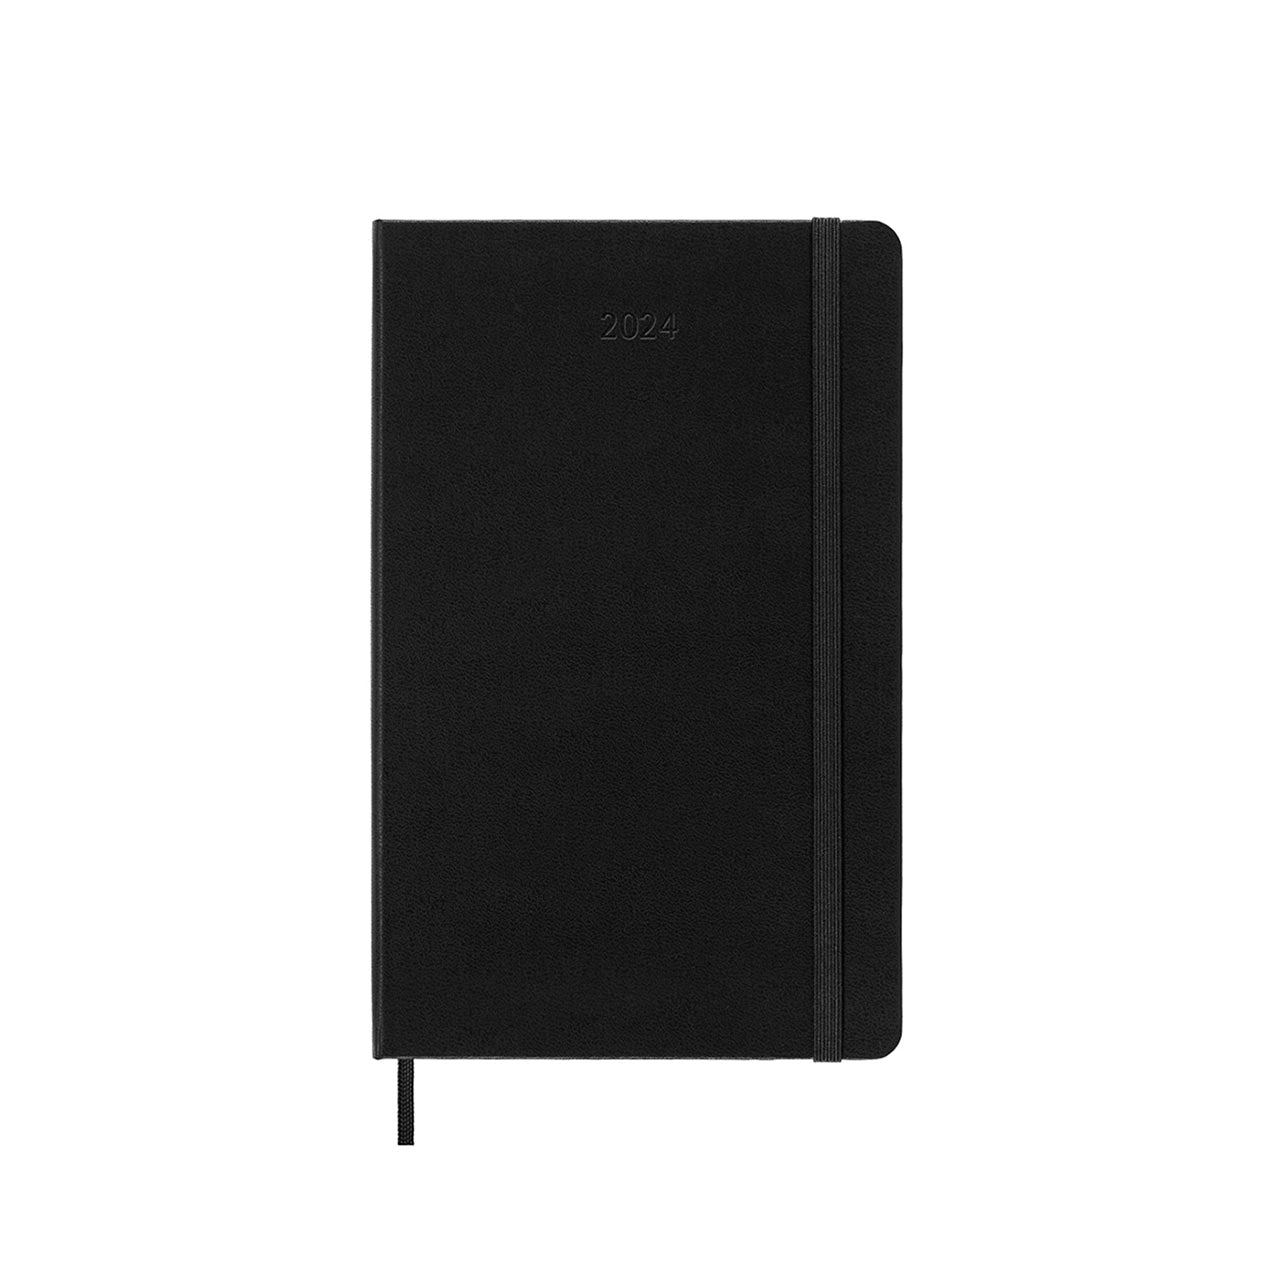 Moleskine 2024 Diary - Daily Planner (Large) - The Deckle Edge